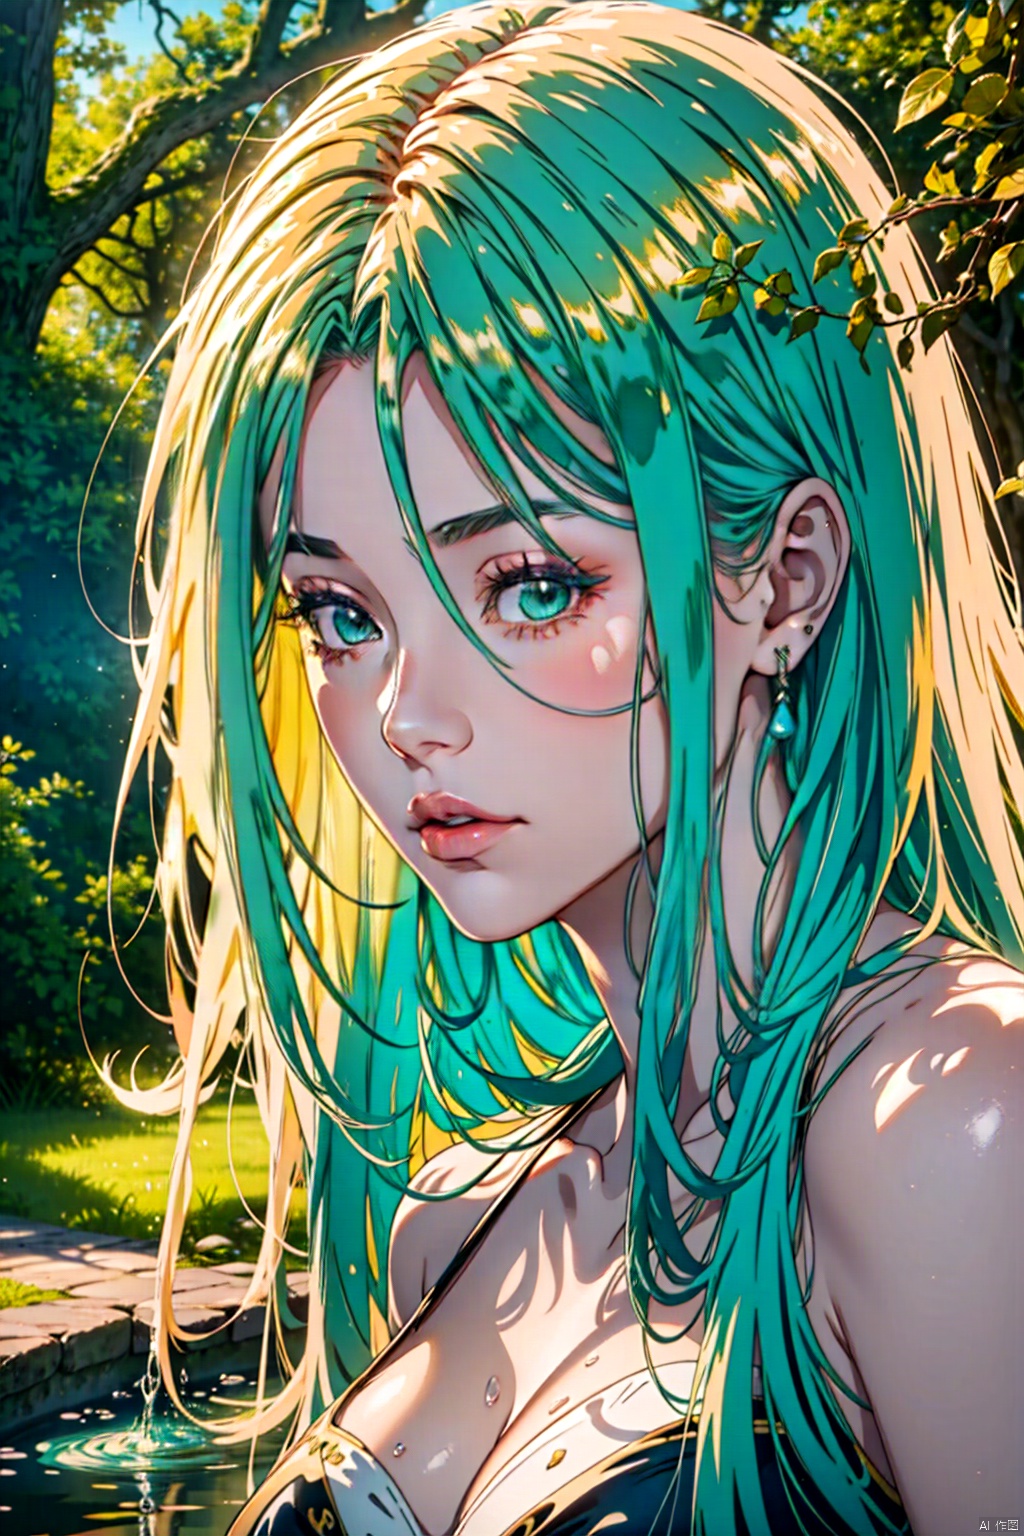  splash art, digital painting, alcohol ink painting, luminism, golden lines, BjD doll face, porcelain skin, baroque, long swirling green hair, lavish green leaves, falling blue flowers, celestial lighting, butterflies, tree branches, sky, golden glowing, water drops,1gril

best quality, masterpiece, high res, absurd res,
perfect lighting, vibrant colors, intricate details,
high detailed skin, pale skin,
, 1gril,1boy, abstract,doodle art